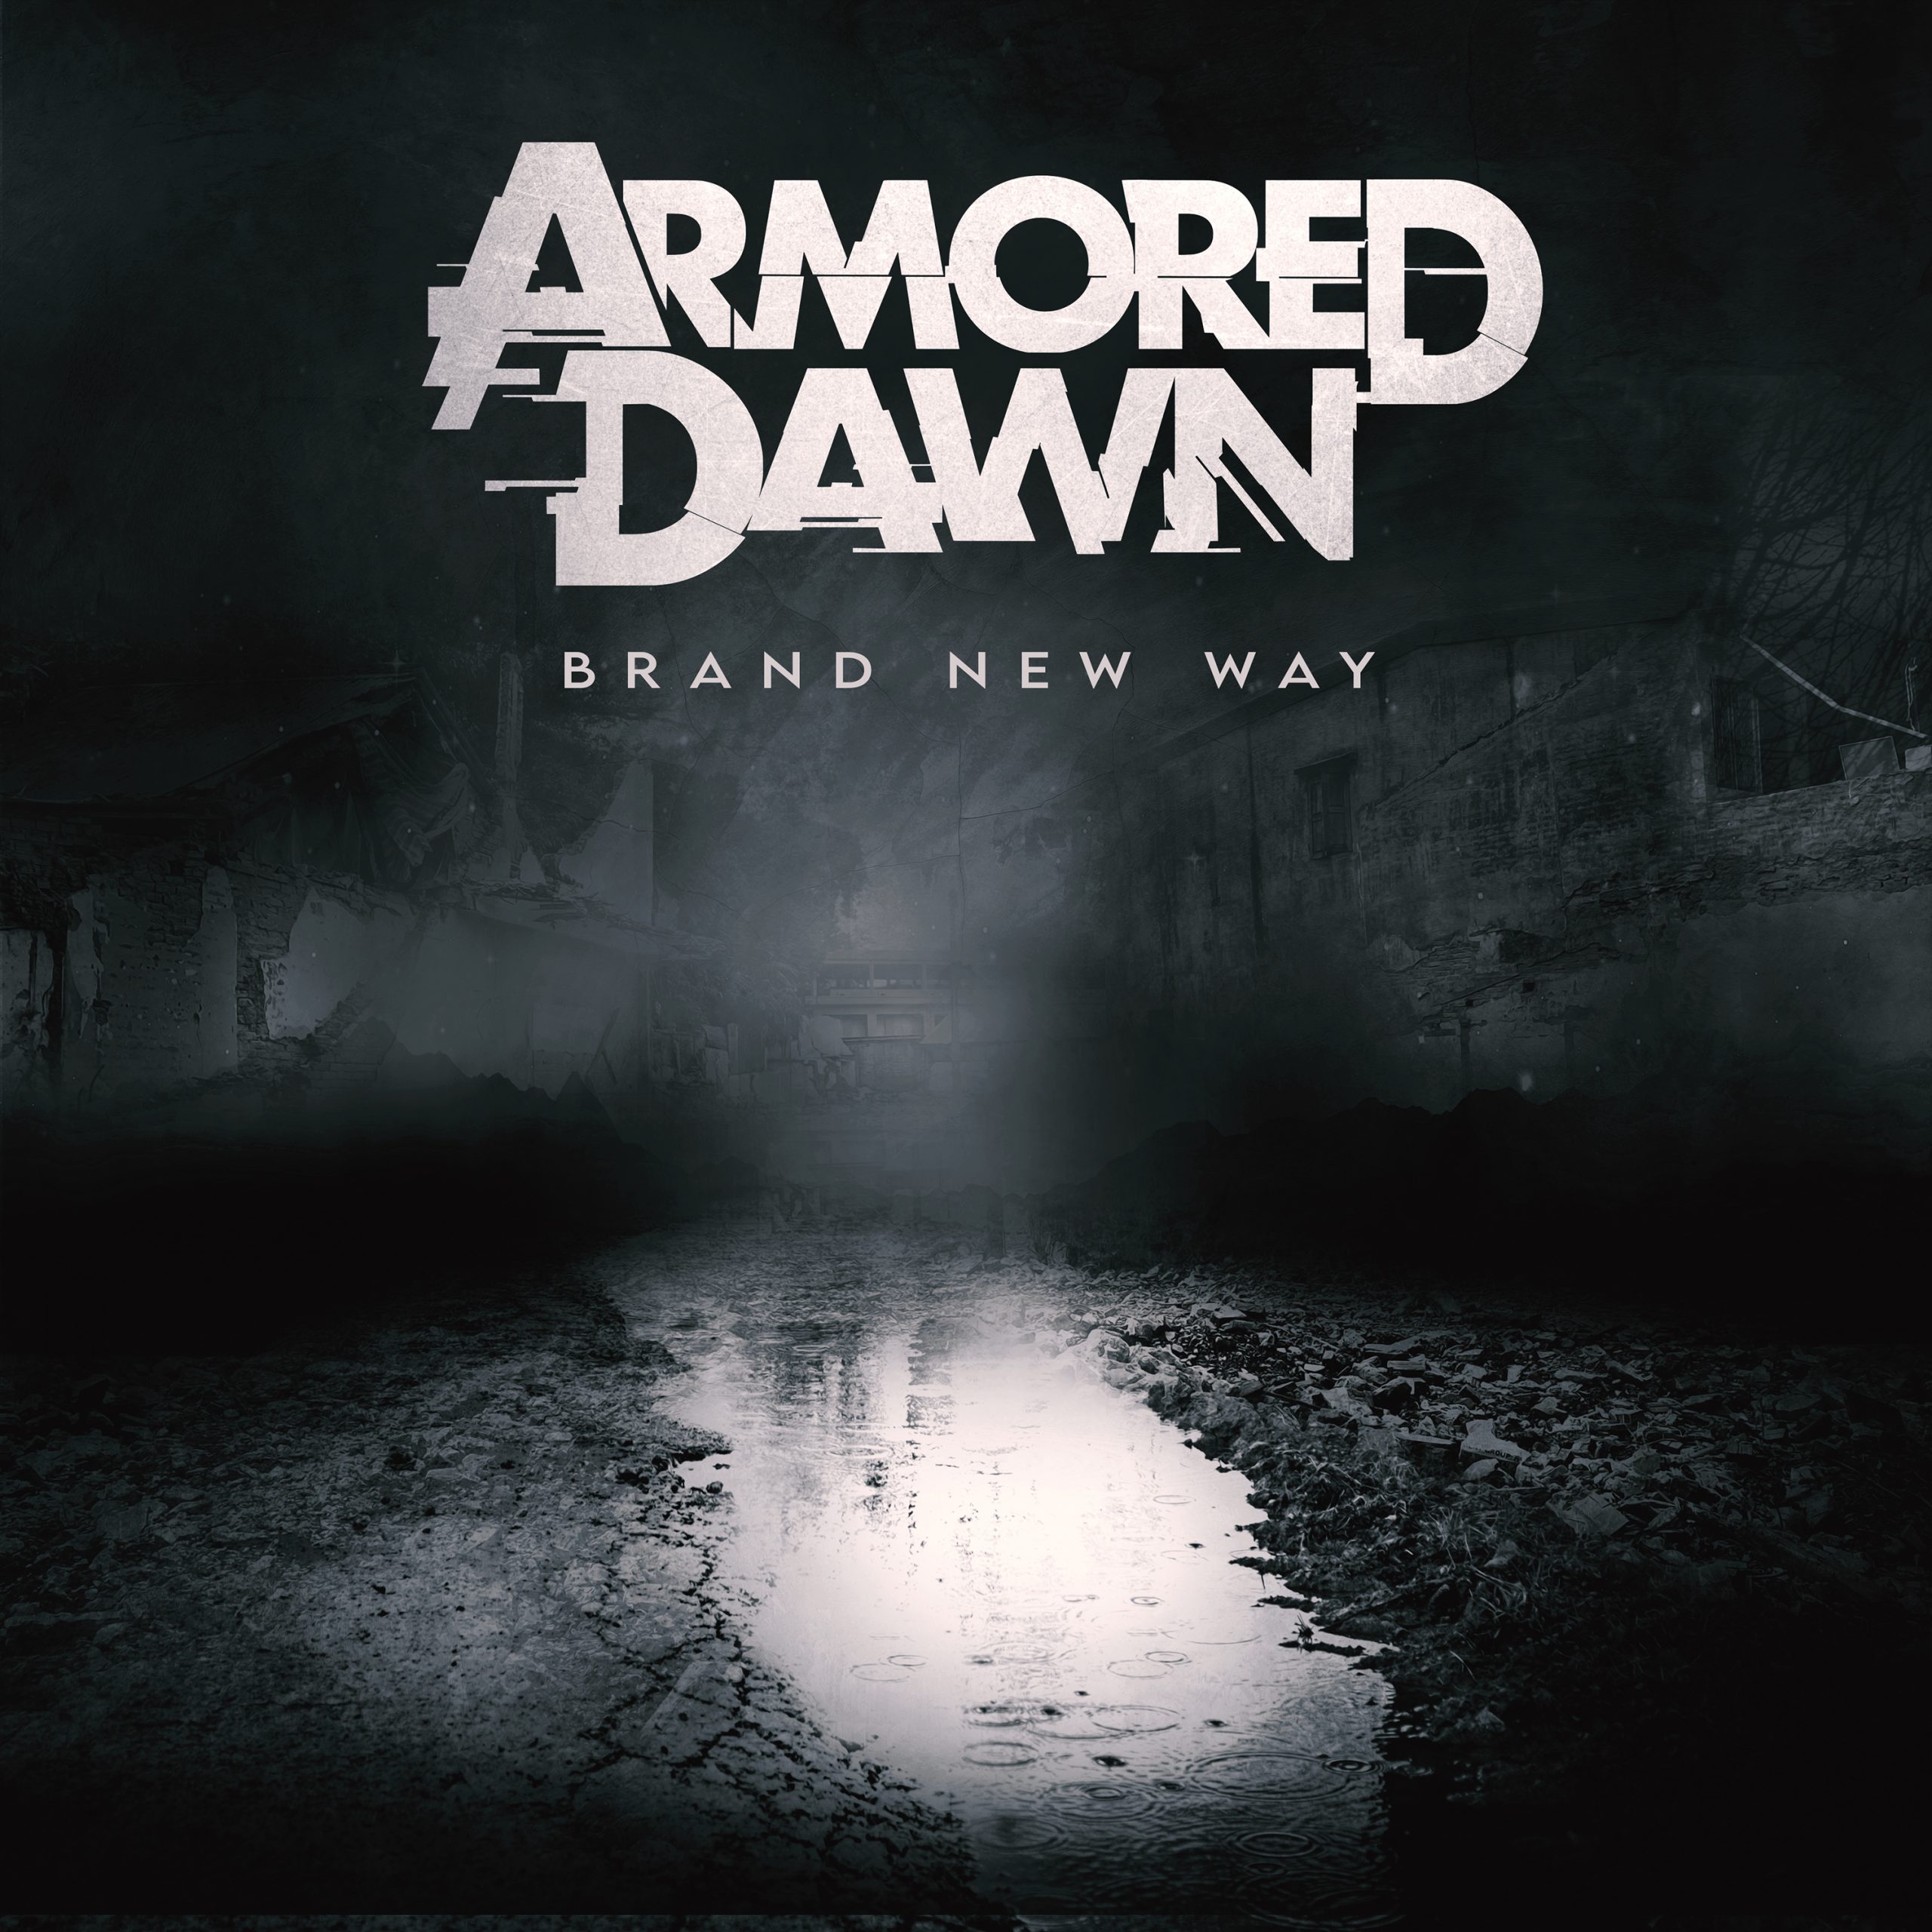 Armored Dawn’s Latest Release ‘Brand New Way’ Marks a Musical Evolution and Teases Fourth Album on the playlist.